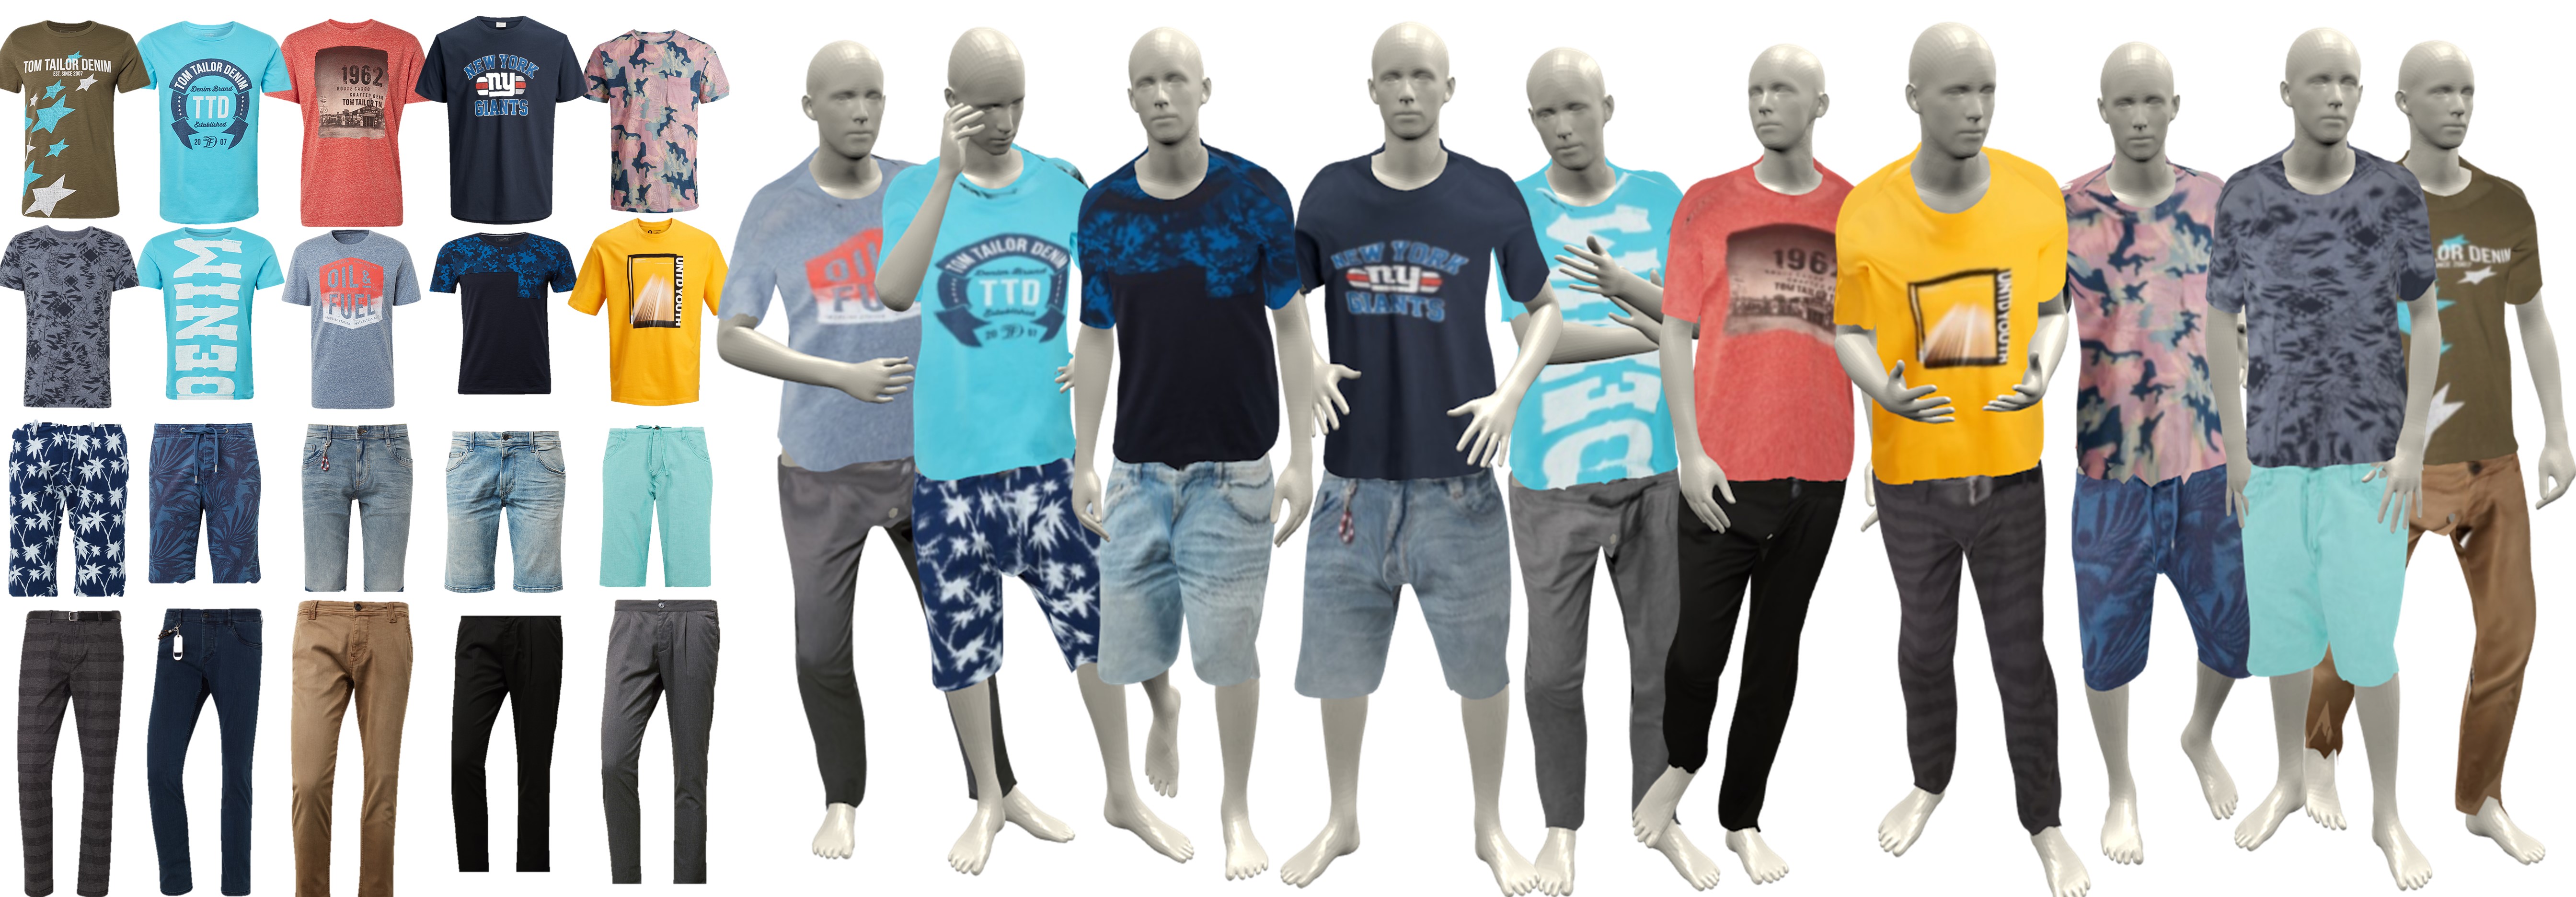 Learning to Transfer Texture from Clothing Images to 3D Humans